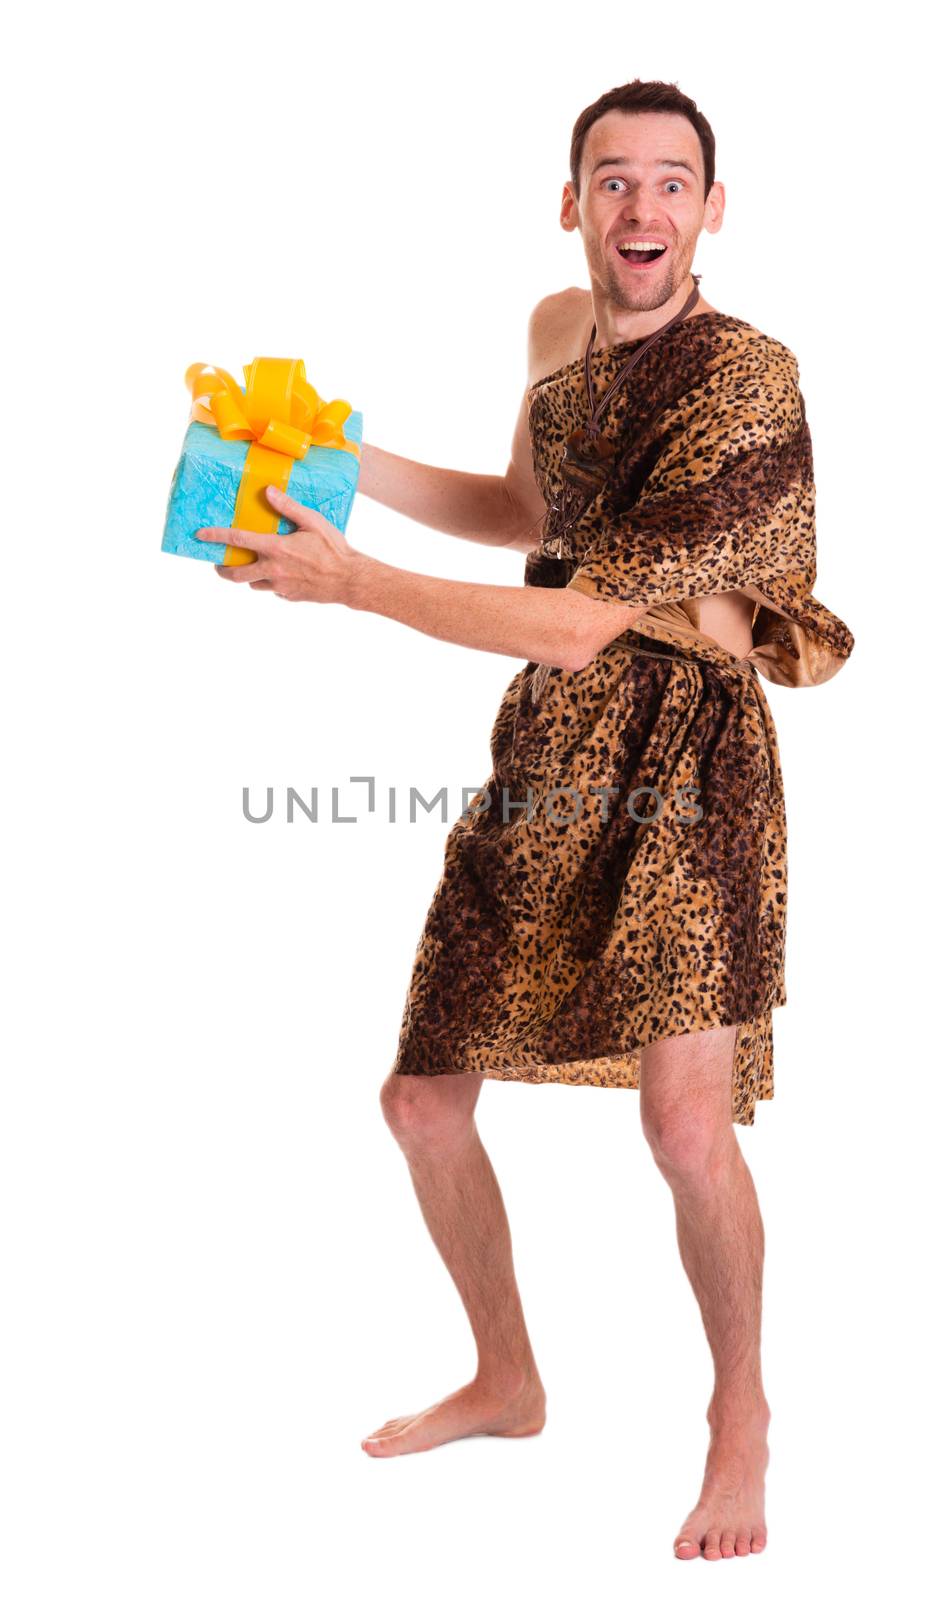 Emotional and happy wild funny man in animal fell with present or gift pack isolated on white background